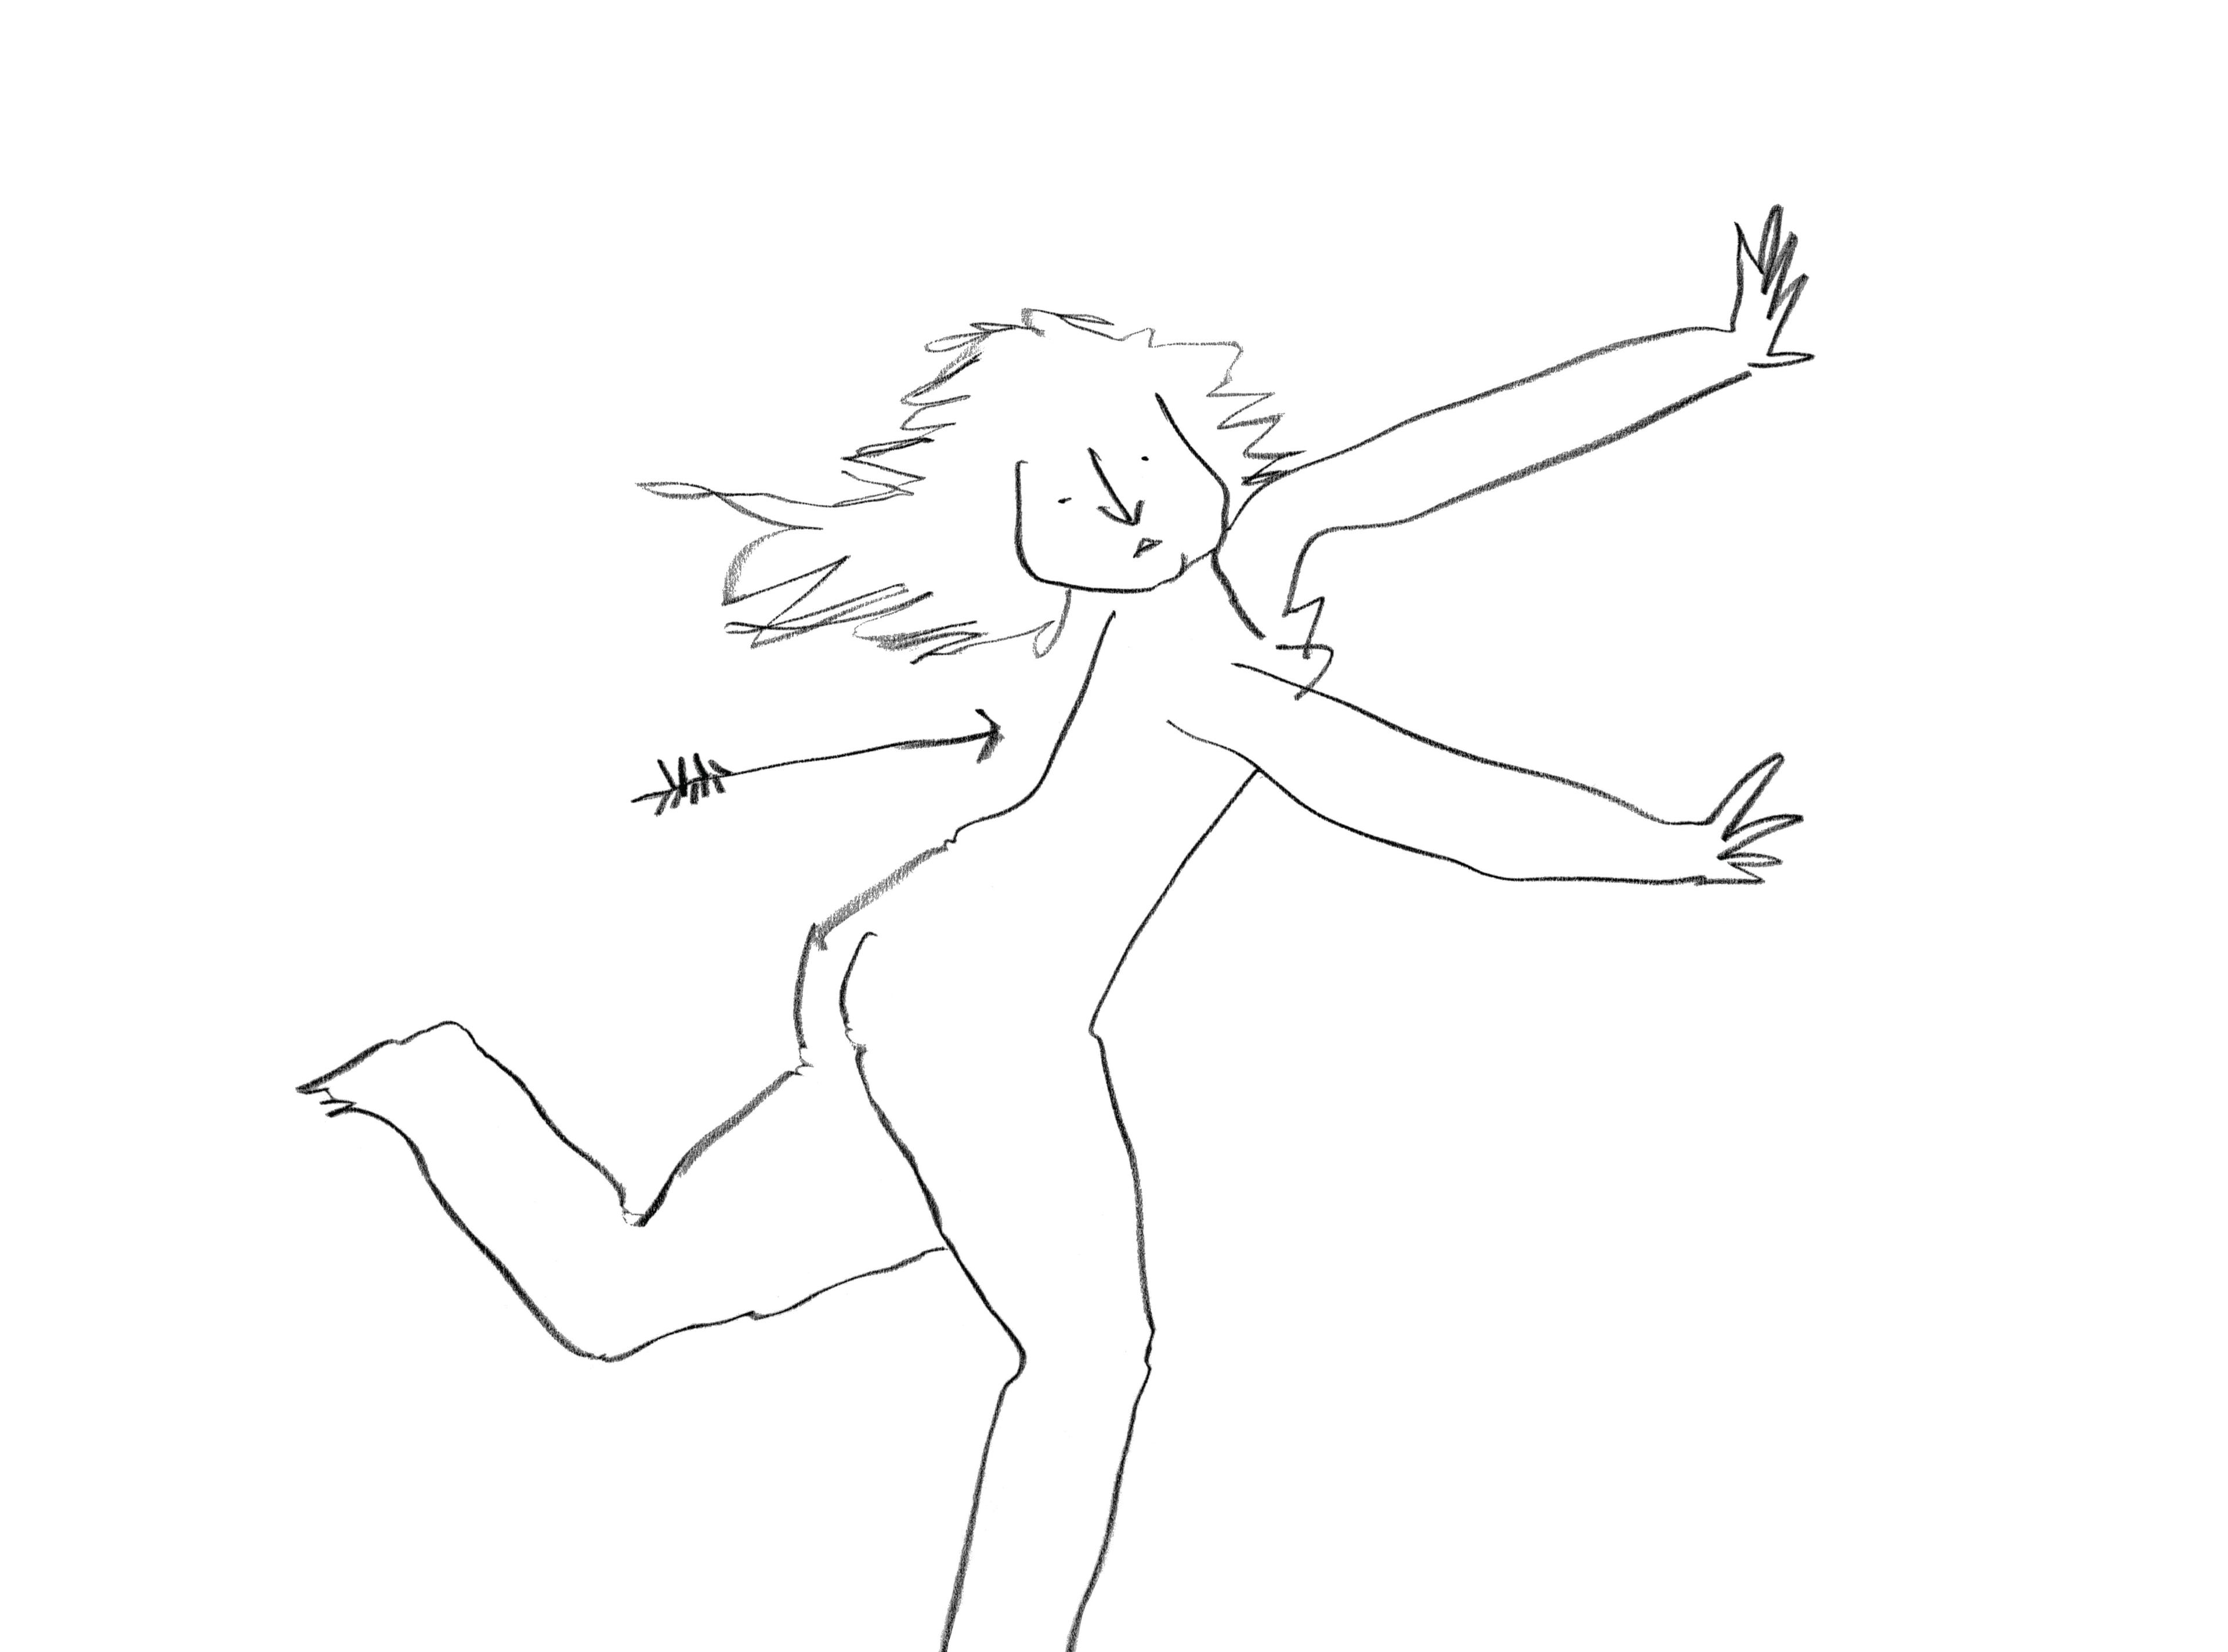 Loose drawing of a nude figure running from a flying arrow